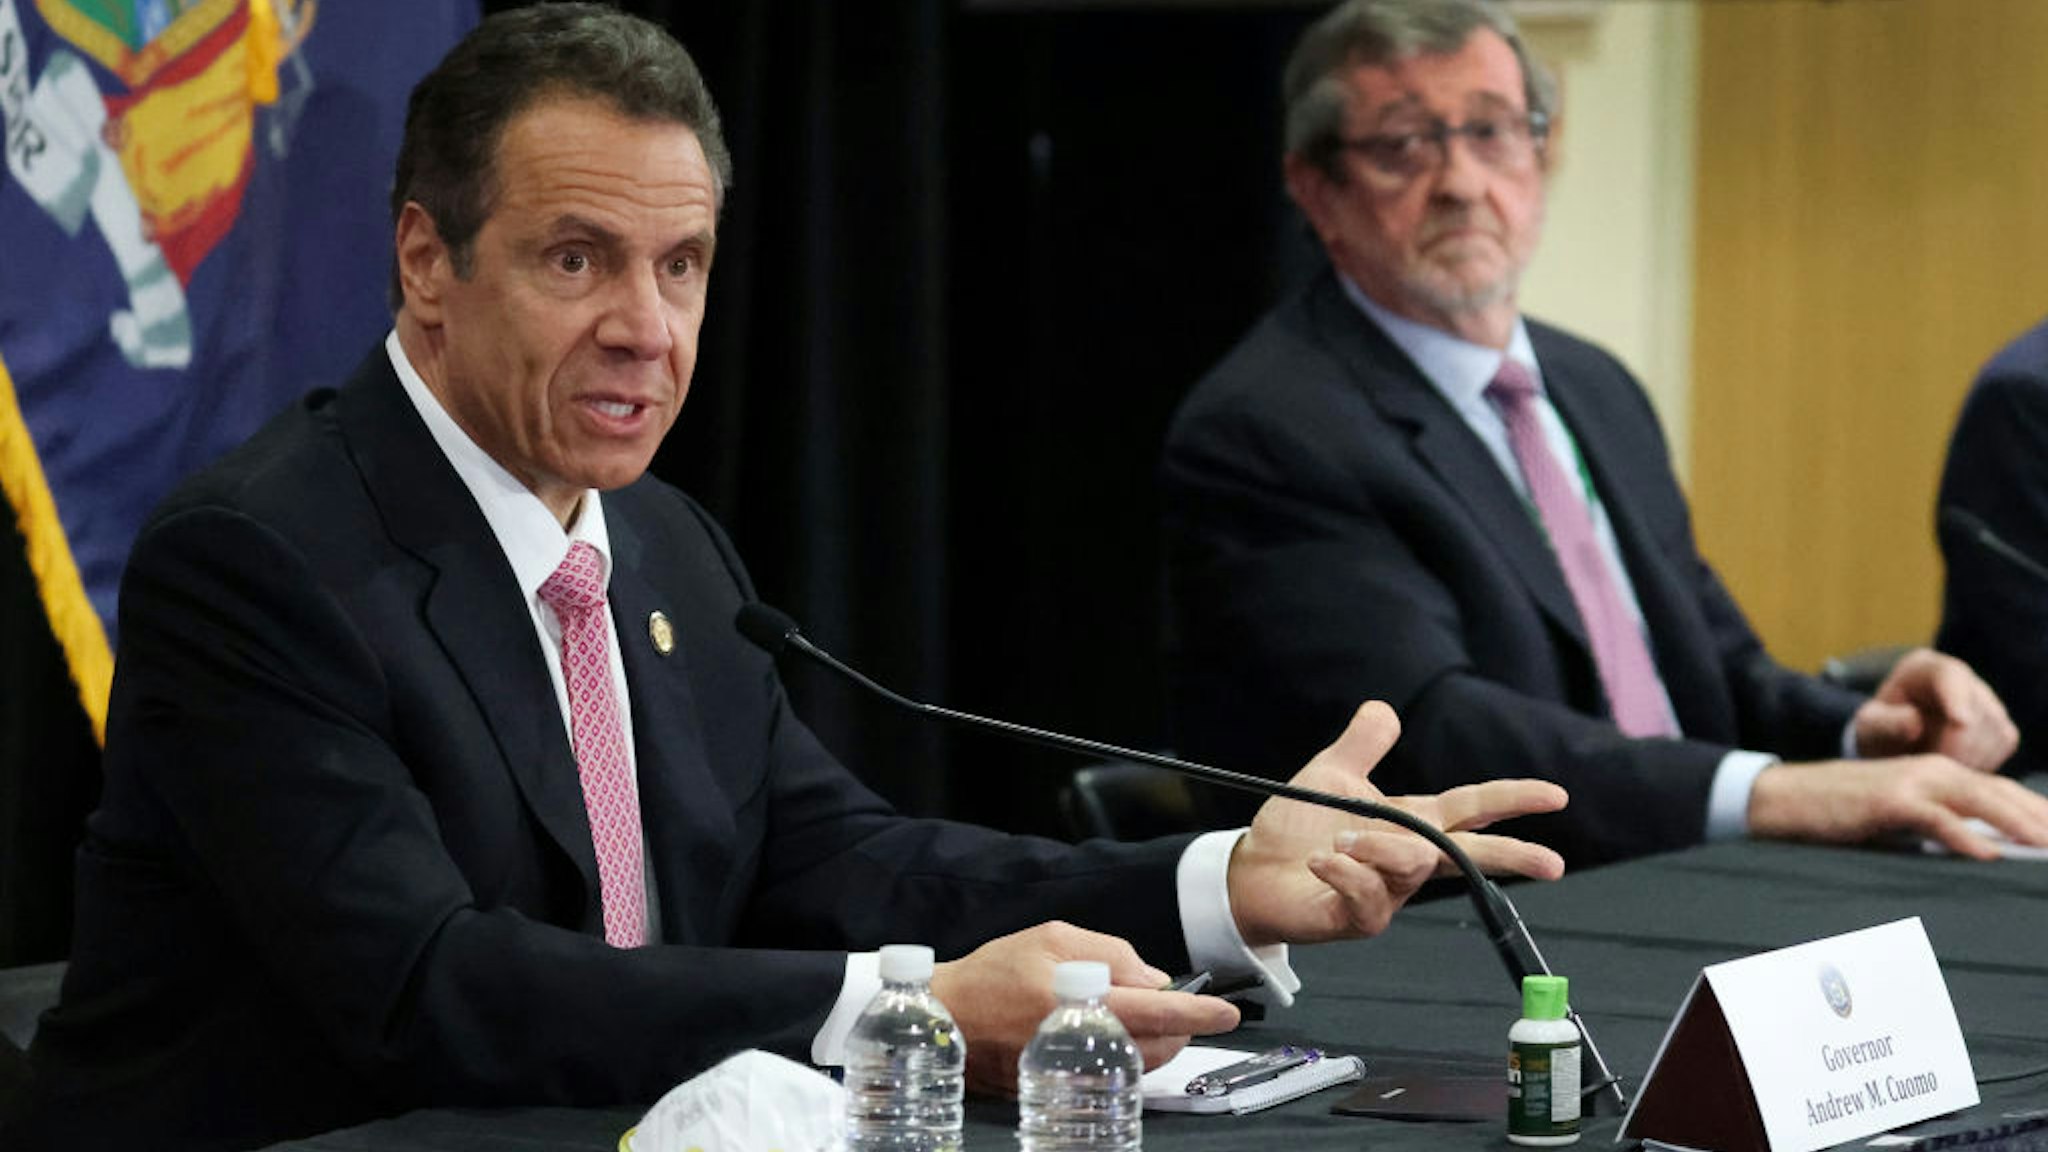 New York Governor Andrew Cuomo speaks while President and CEO of Northwell Health Michael Dowling looks on during a Coronavirus Briefing At Northwell Feinstein Institute For Medical Research on May 06, 2020 in Manhasset, New York.